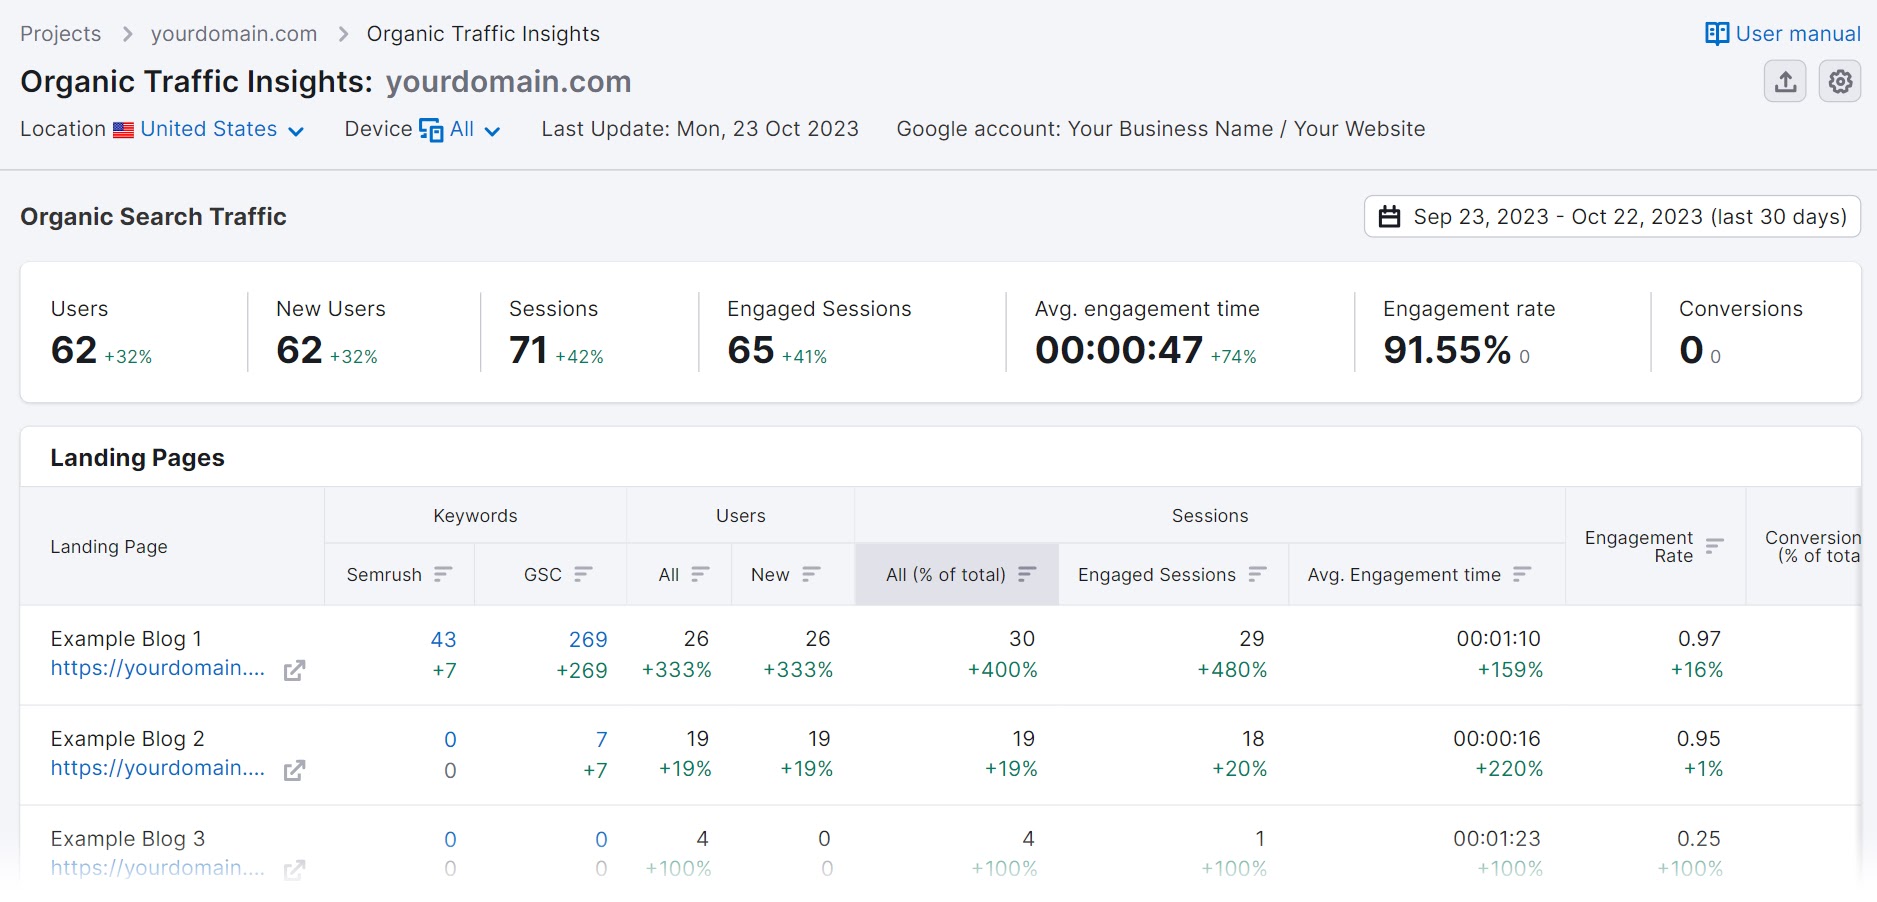 "Landing Pages" report in Organic Traffic Insights